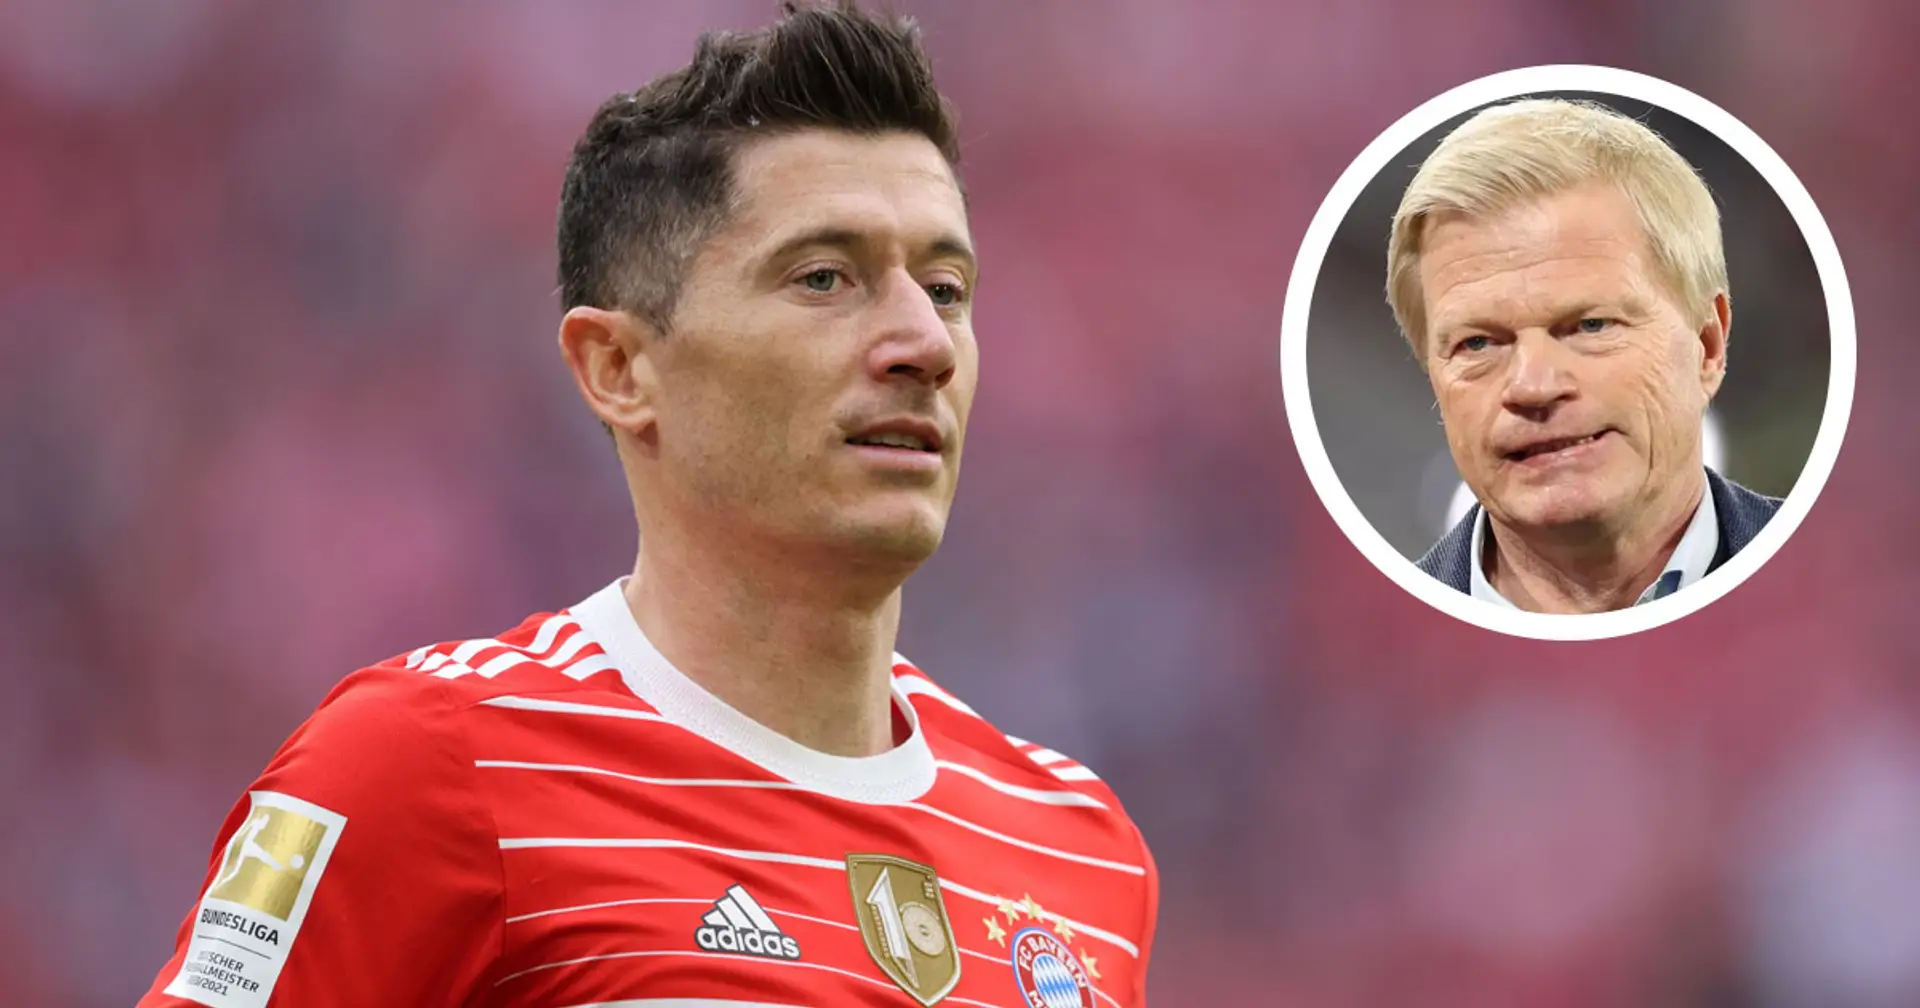 'He will fulfill his contract': Bayern Munich CEO Kahn confirms Lewandowski won't be allowed to leave in summer